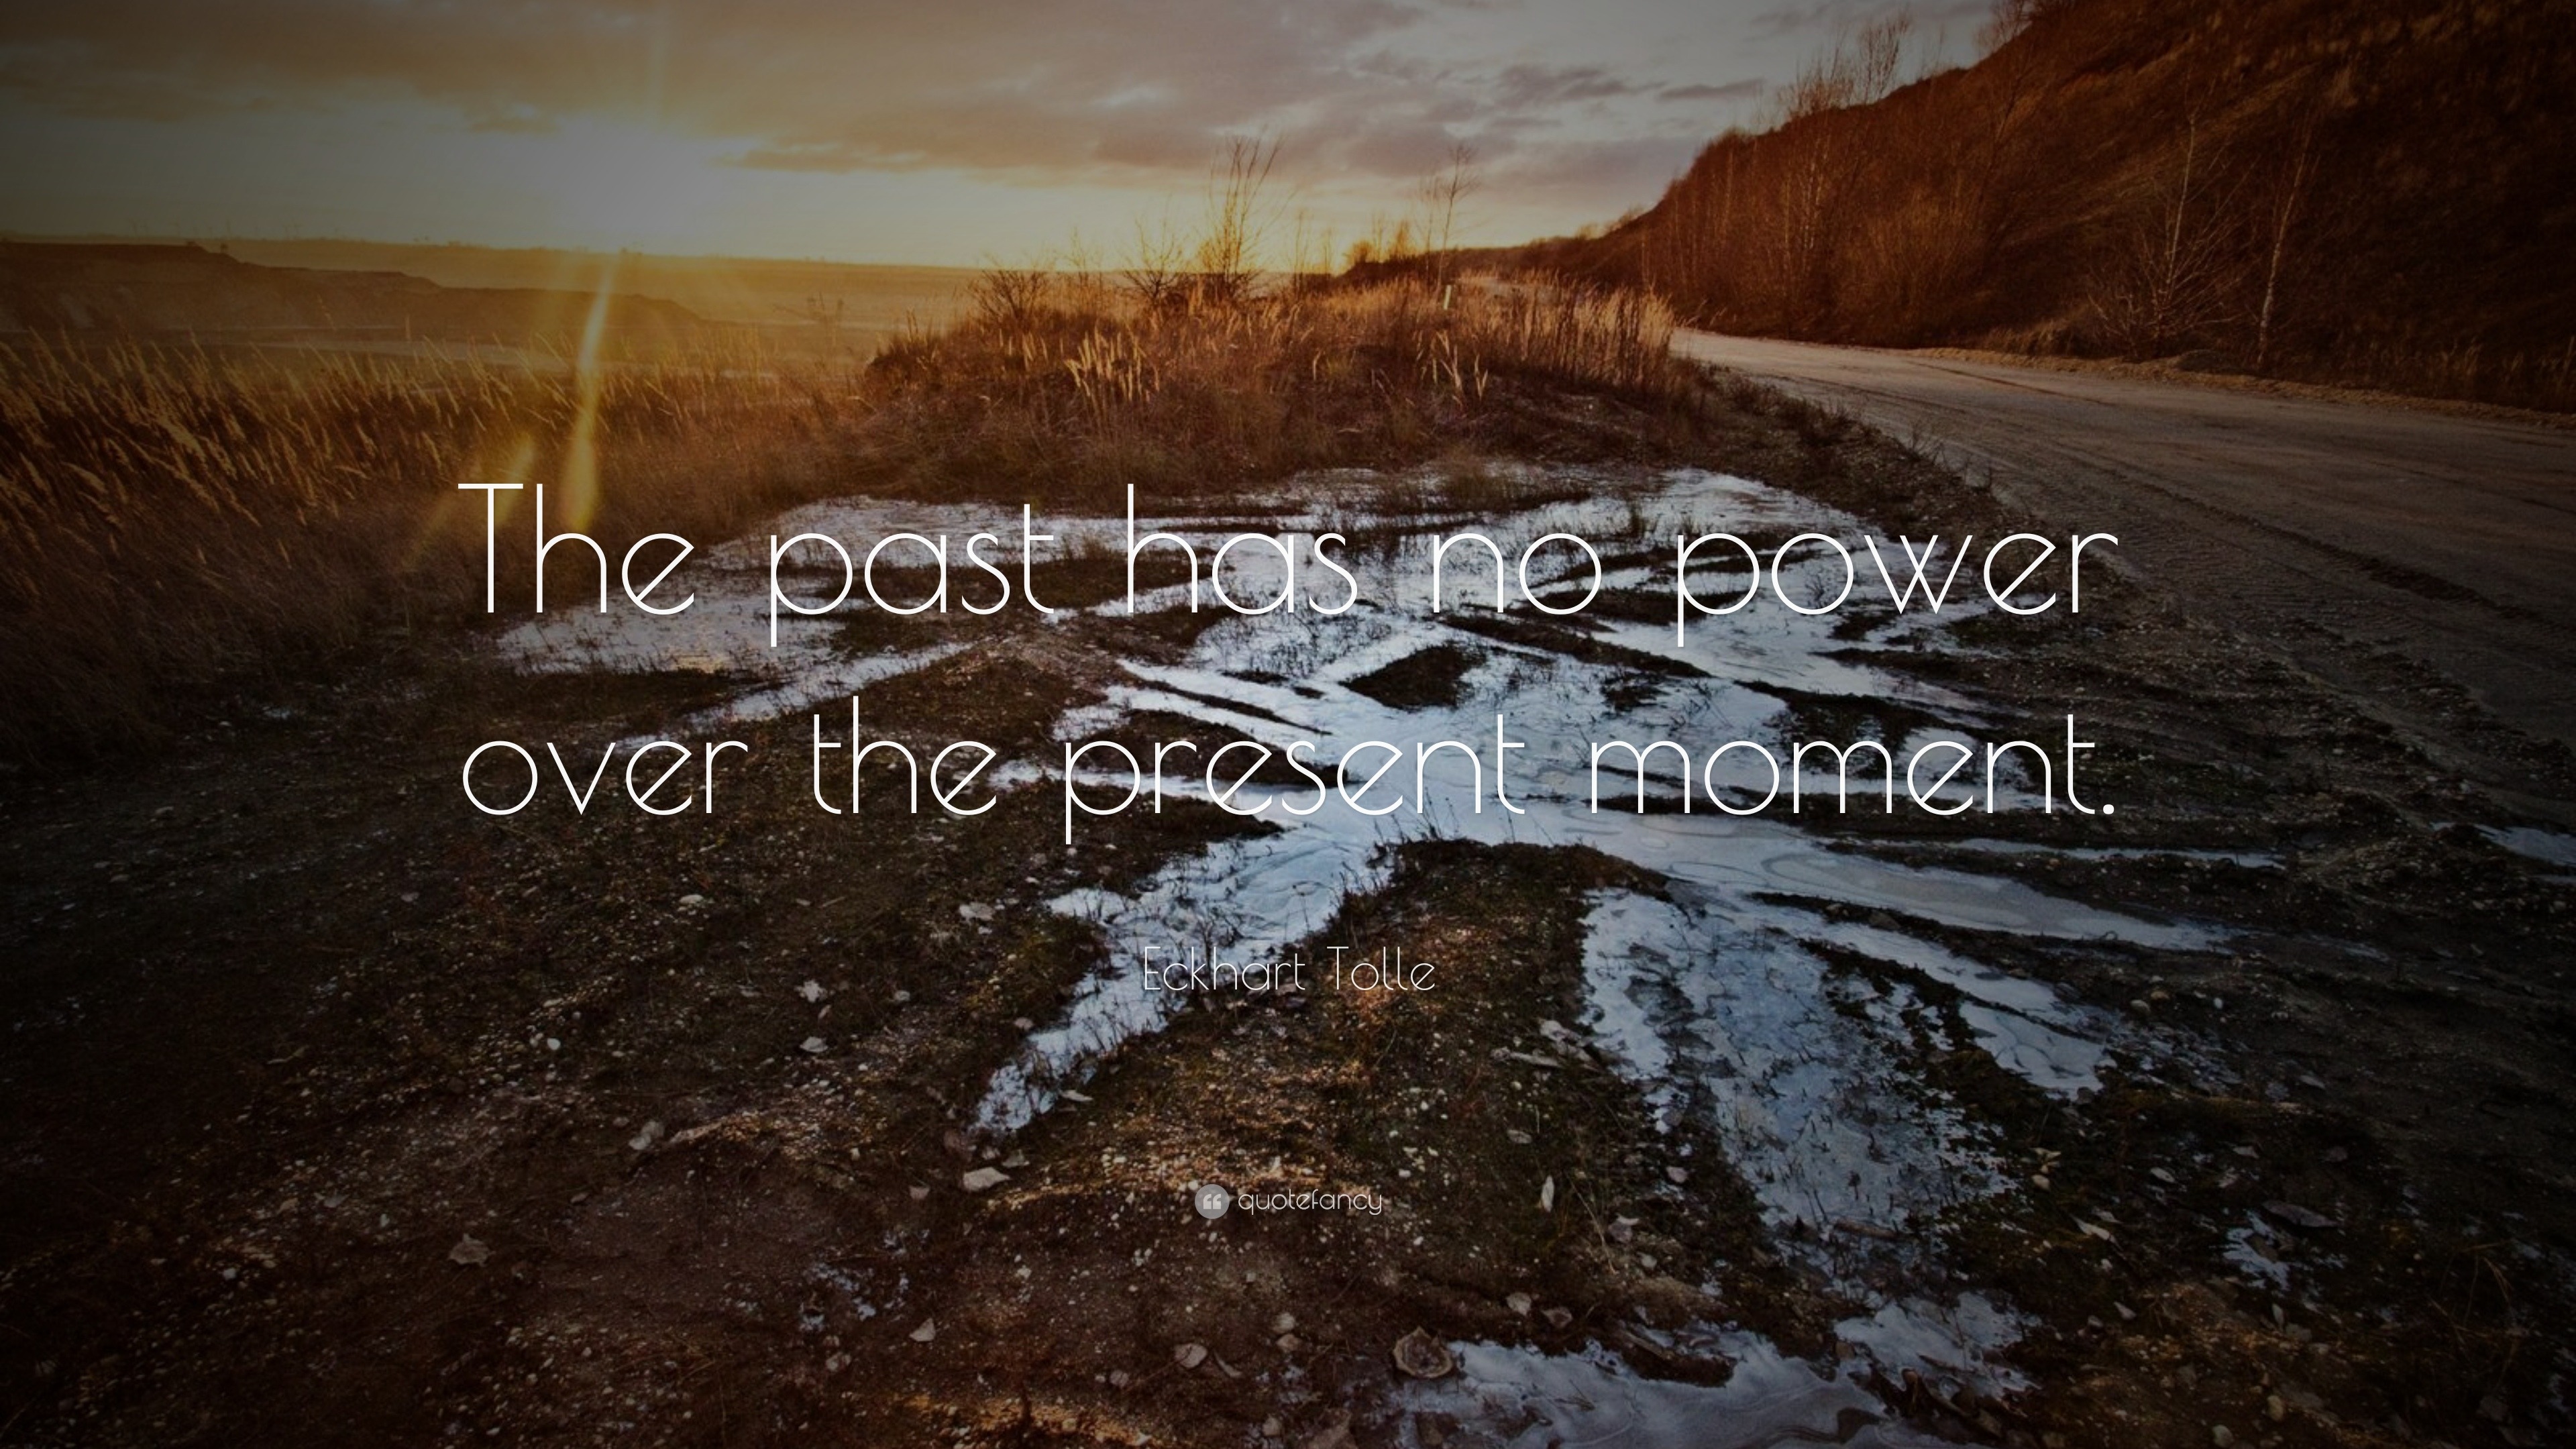 Eckhart Tolle Quote “The past has no power over the present moment ”